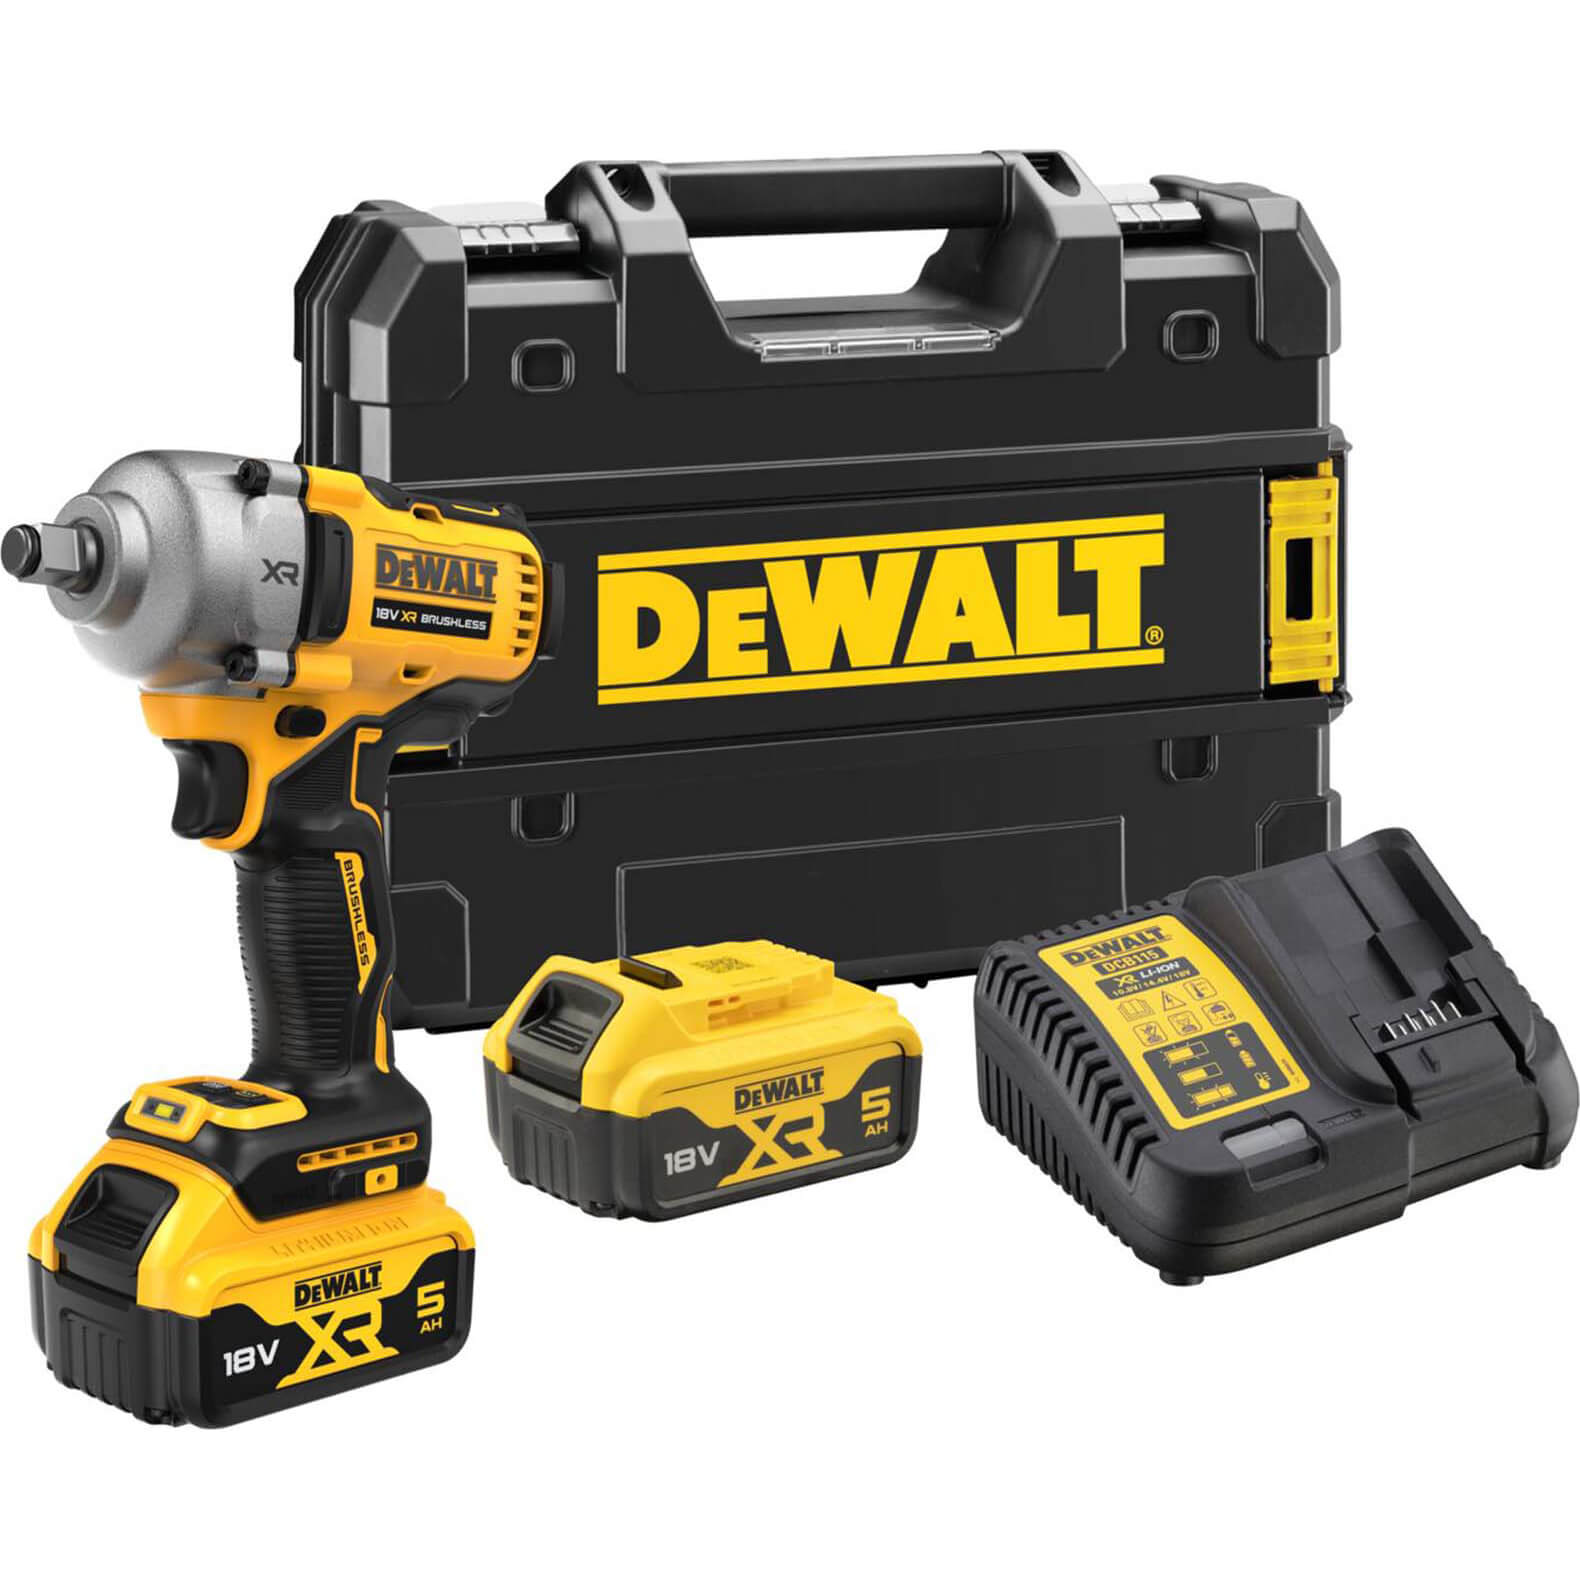 DeWalt DCF891 18v XR Cordless Brushless 1/2" Compact High Torque Wrench 2 x 5ah Li-ion Charger Case